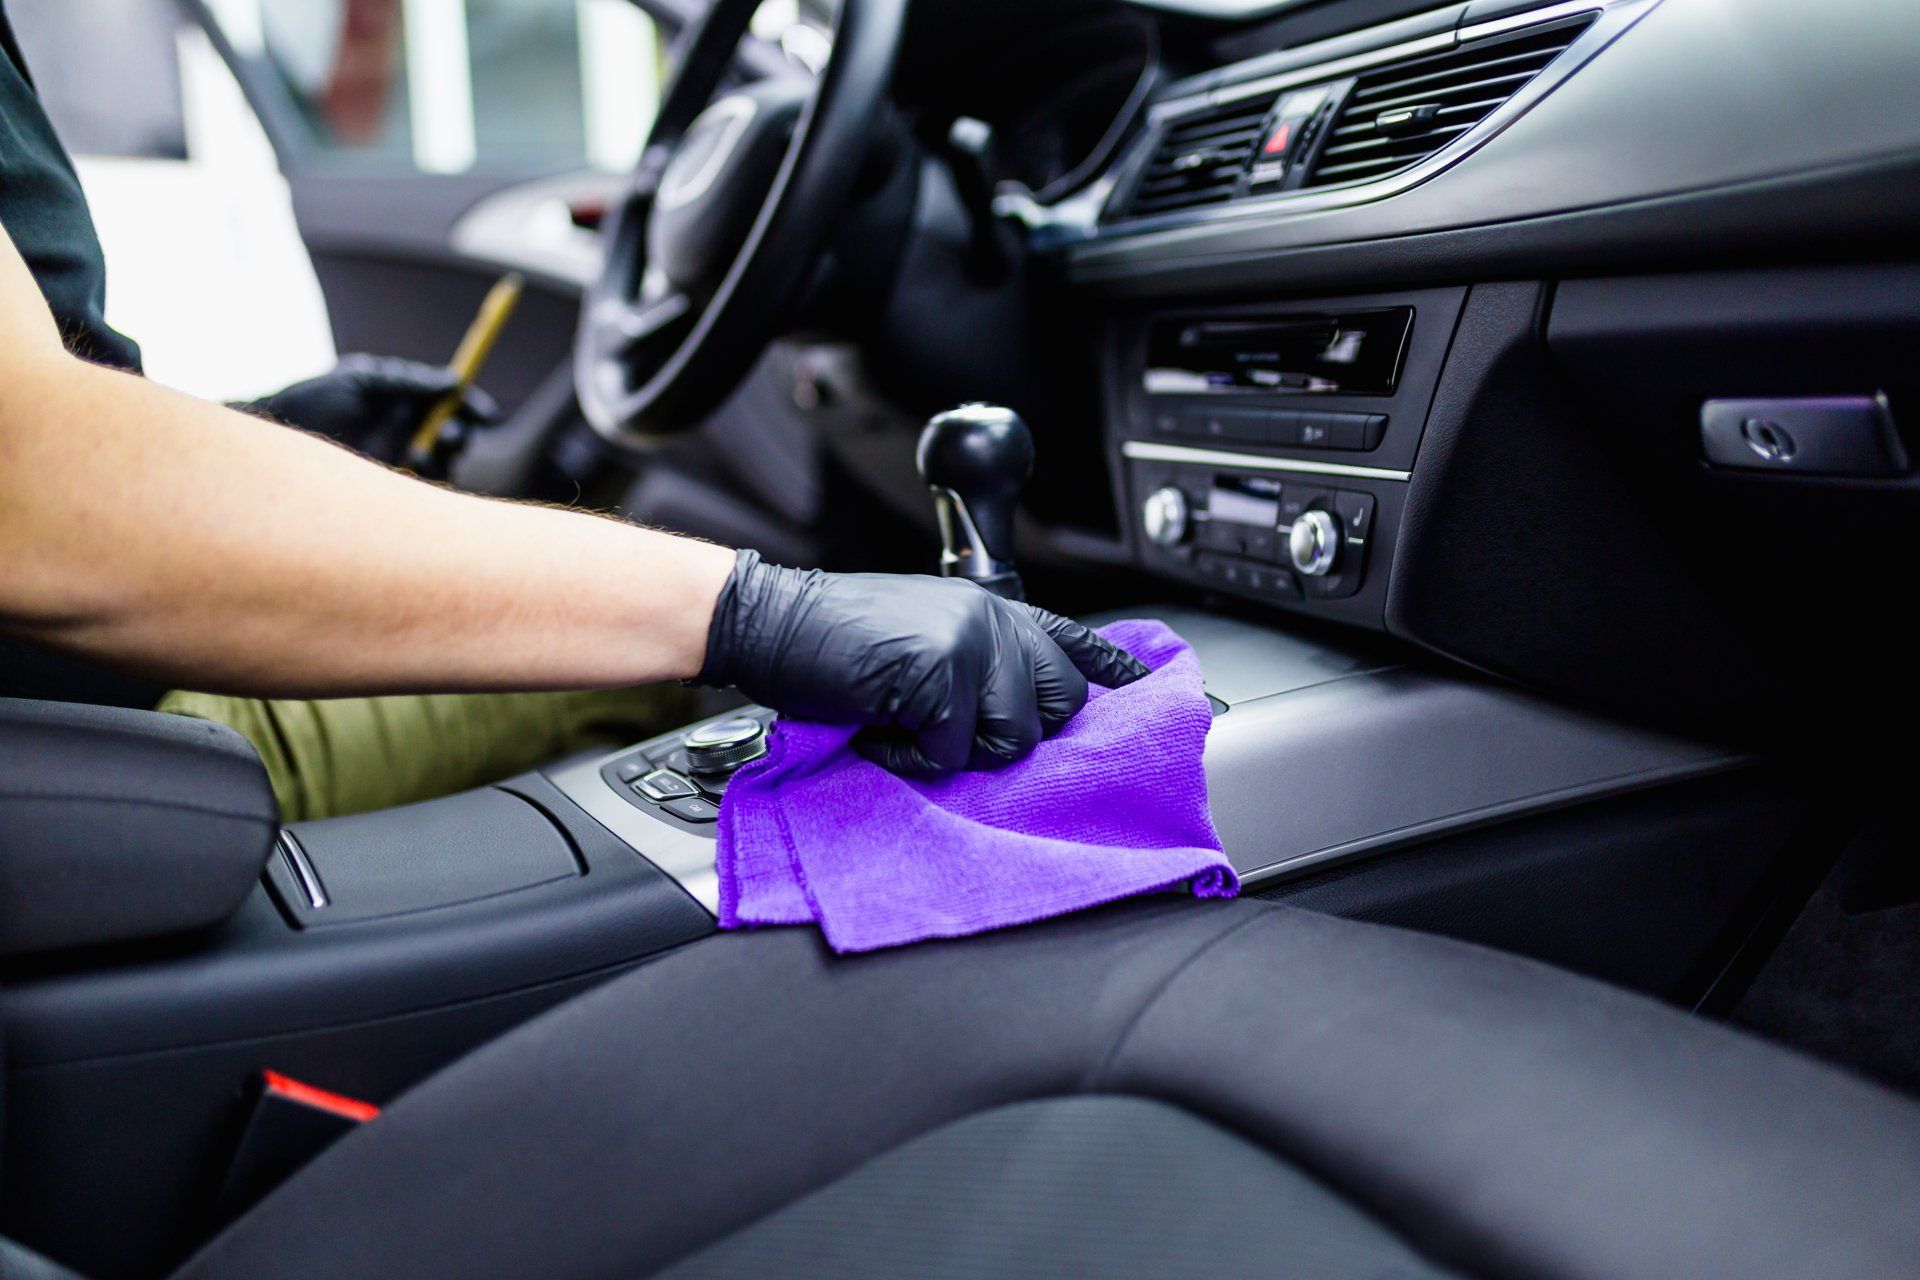 https://lirp.cdn-website.com/8bf226d6/dms3rep/multi/opt/stock-photo-a-man-cleaning-car-interior-car-detailing-or-valeting-concept-selective-focus-743191834-1920w.jpg